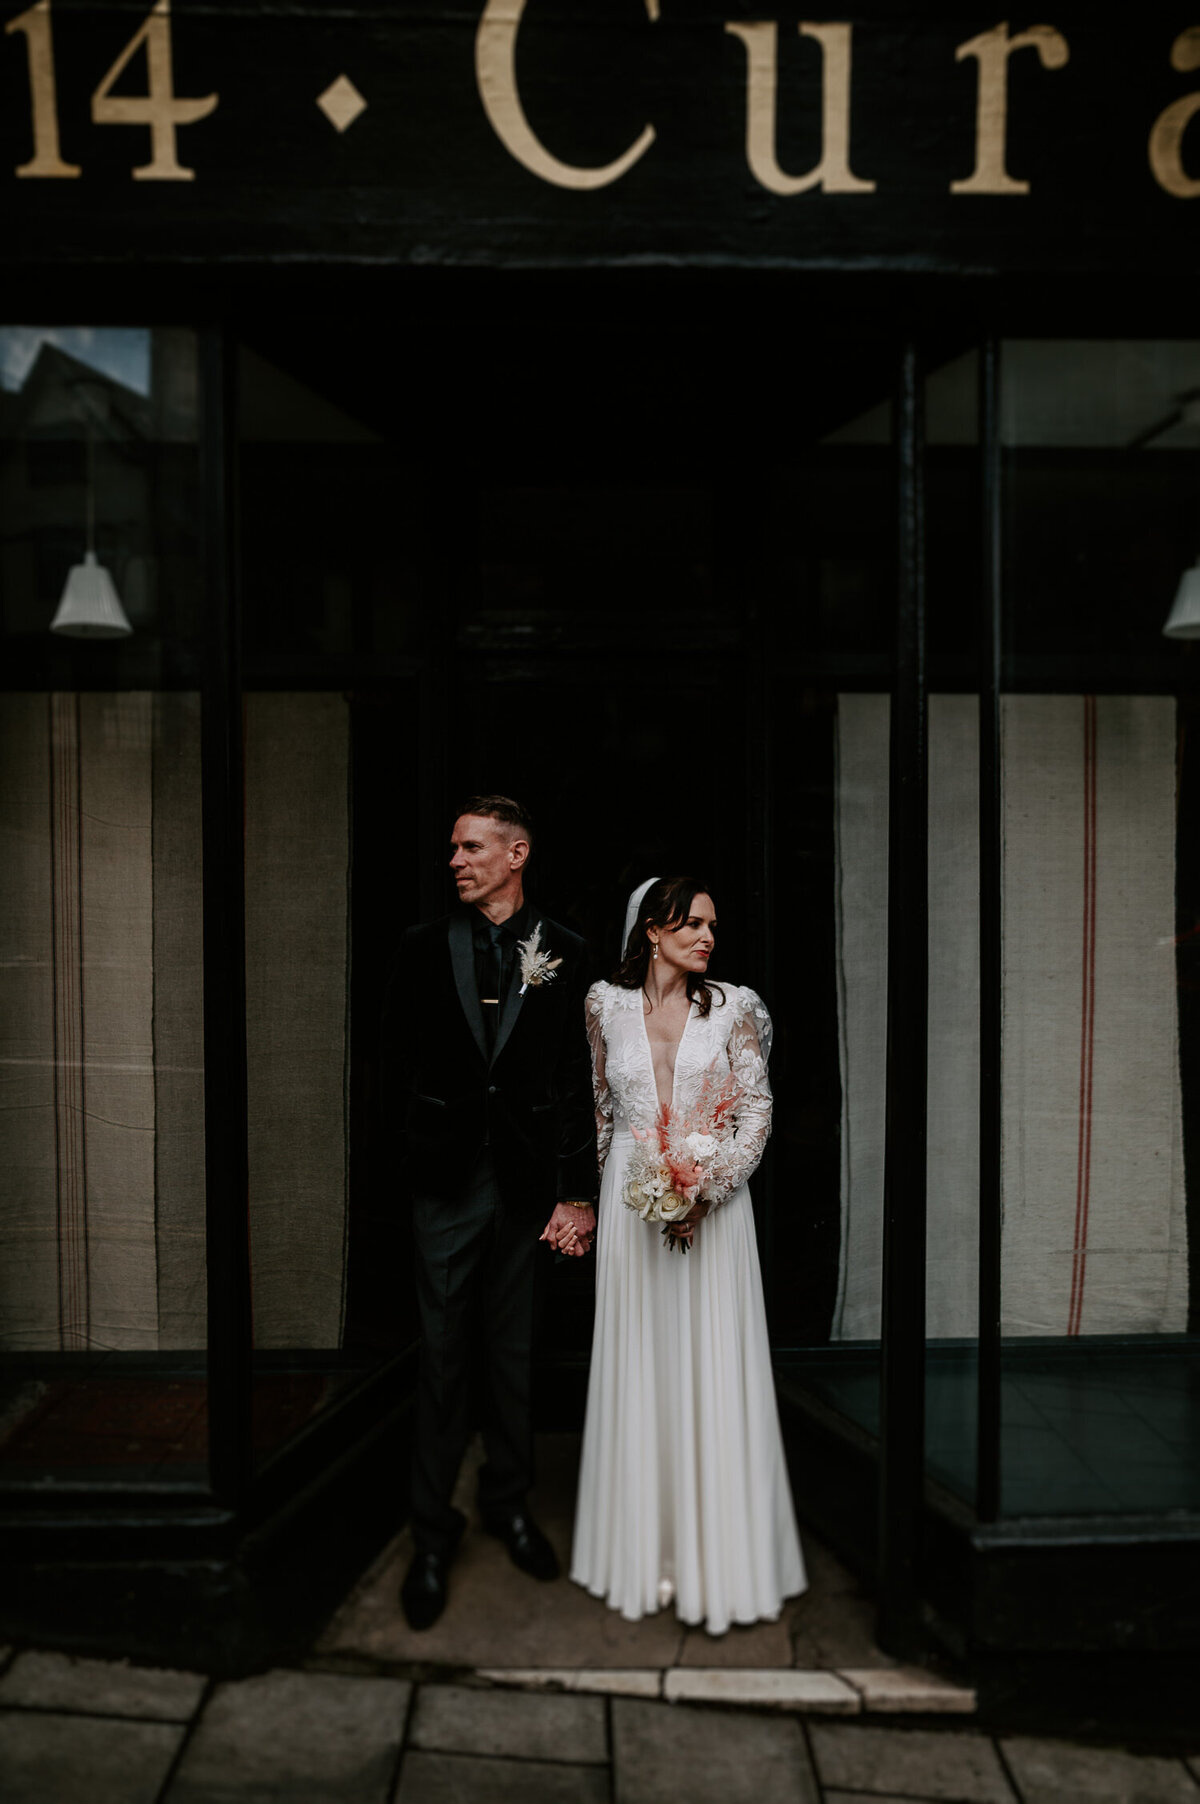 A wedding couple face away from each other in a wedding portrait in a black shop door way near The Mount Without in Bristol.